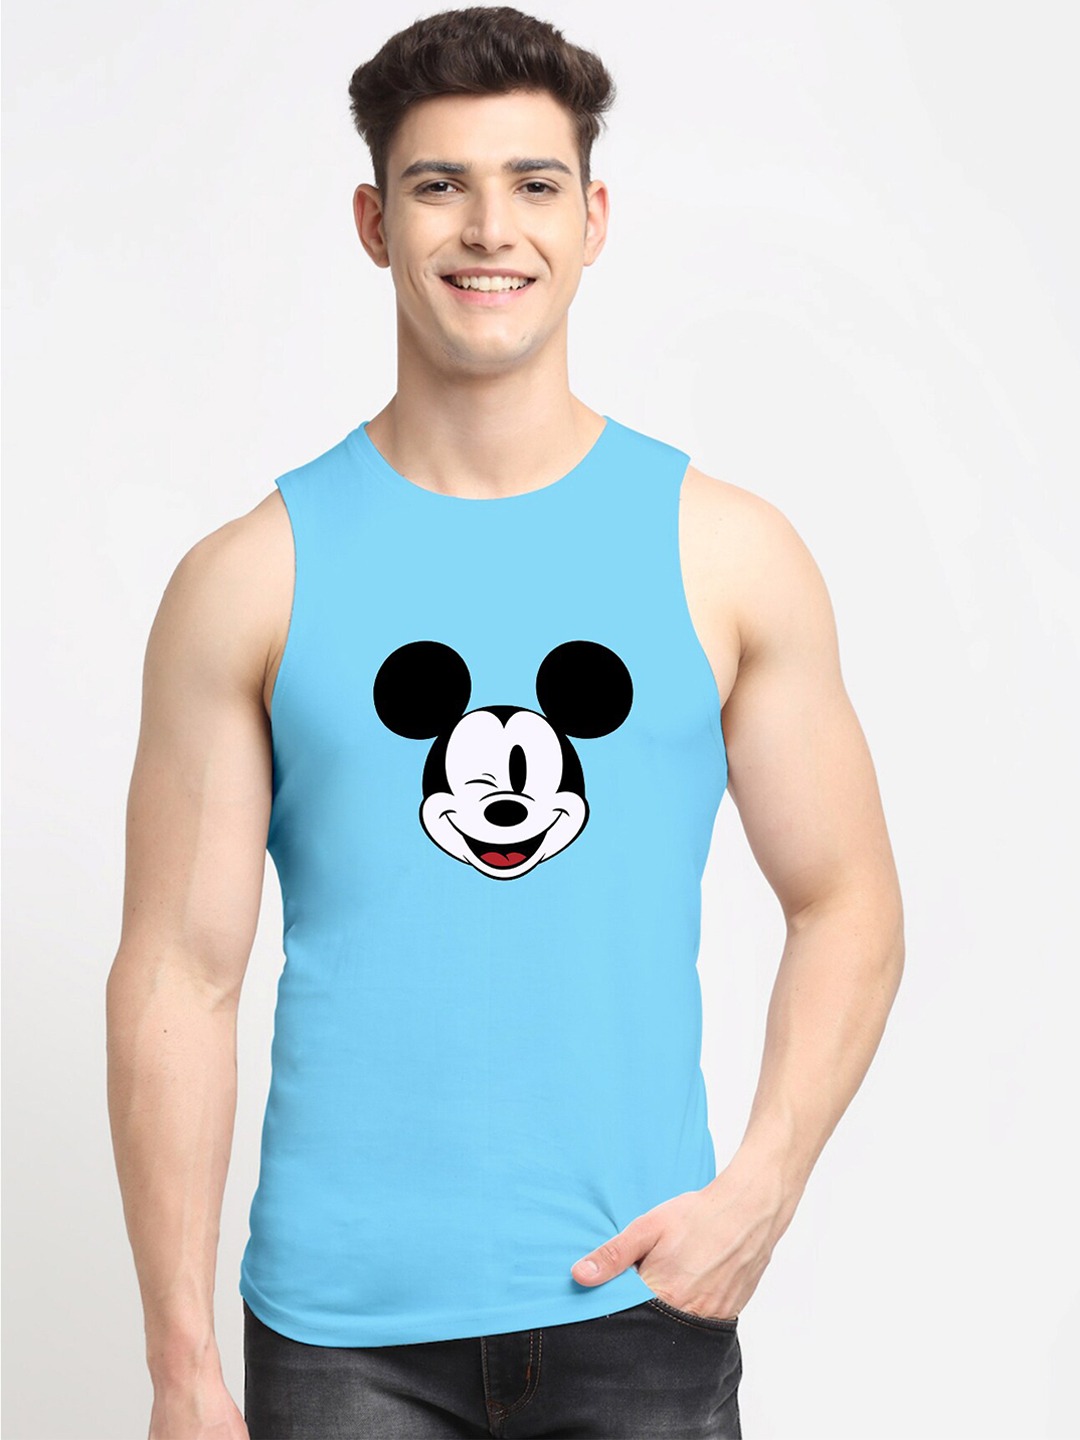 Clothing Innerwear Vests | Friskers Men Turquoise Blue Mickey Mouse Printed Pure Cotton Innerwear  Vests - YS98909